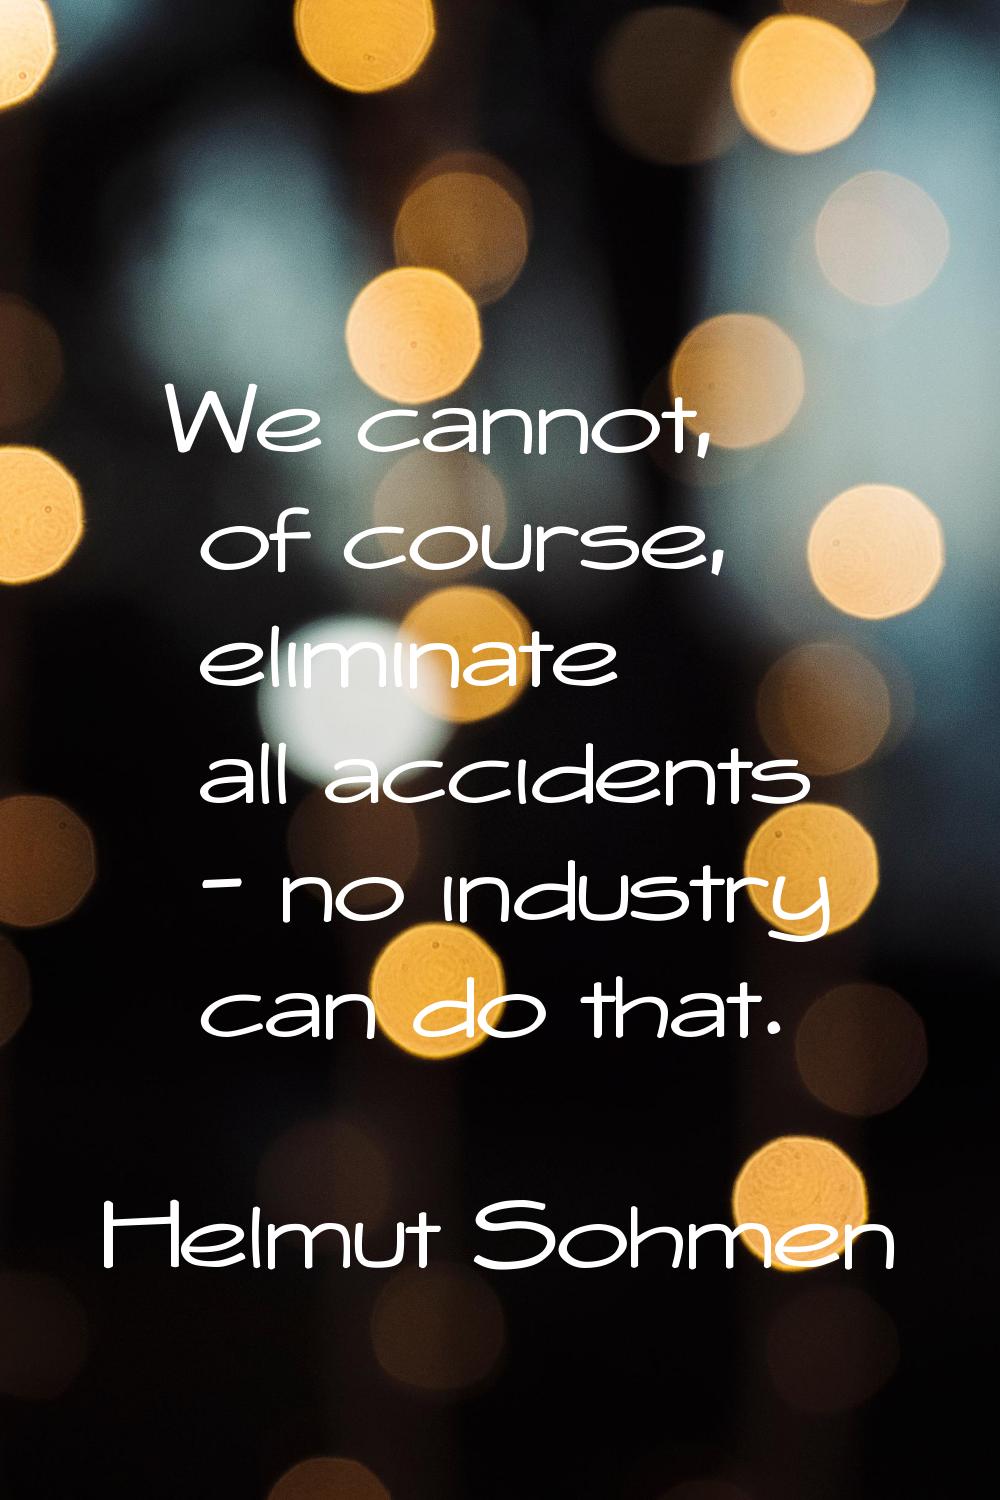 We cannot, of course, eliminate all accidents - no industry can do that.